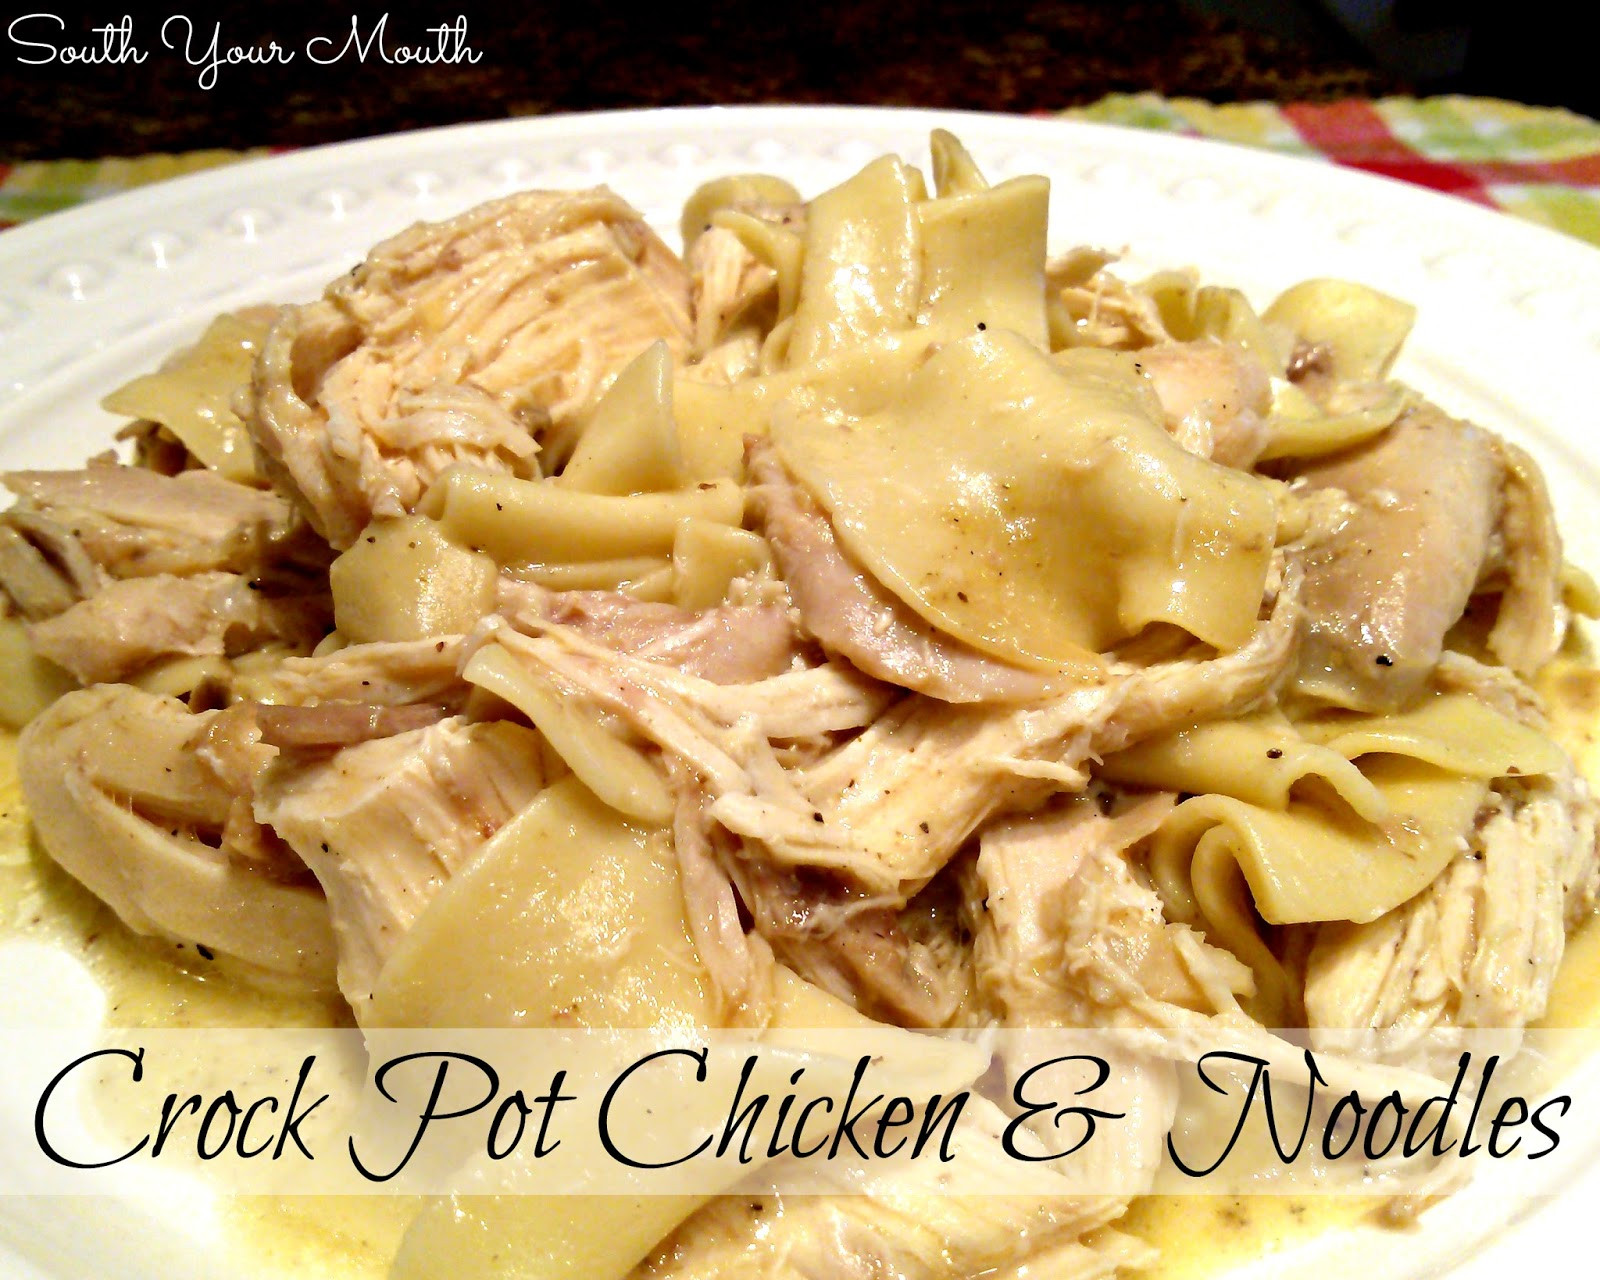 Chicken And Egg Noodles
 South Your Mouth Crock Pot Chicken and Noodles